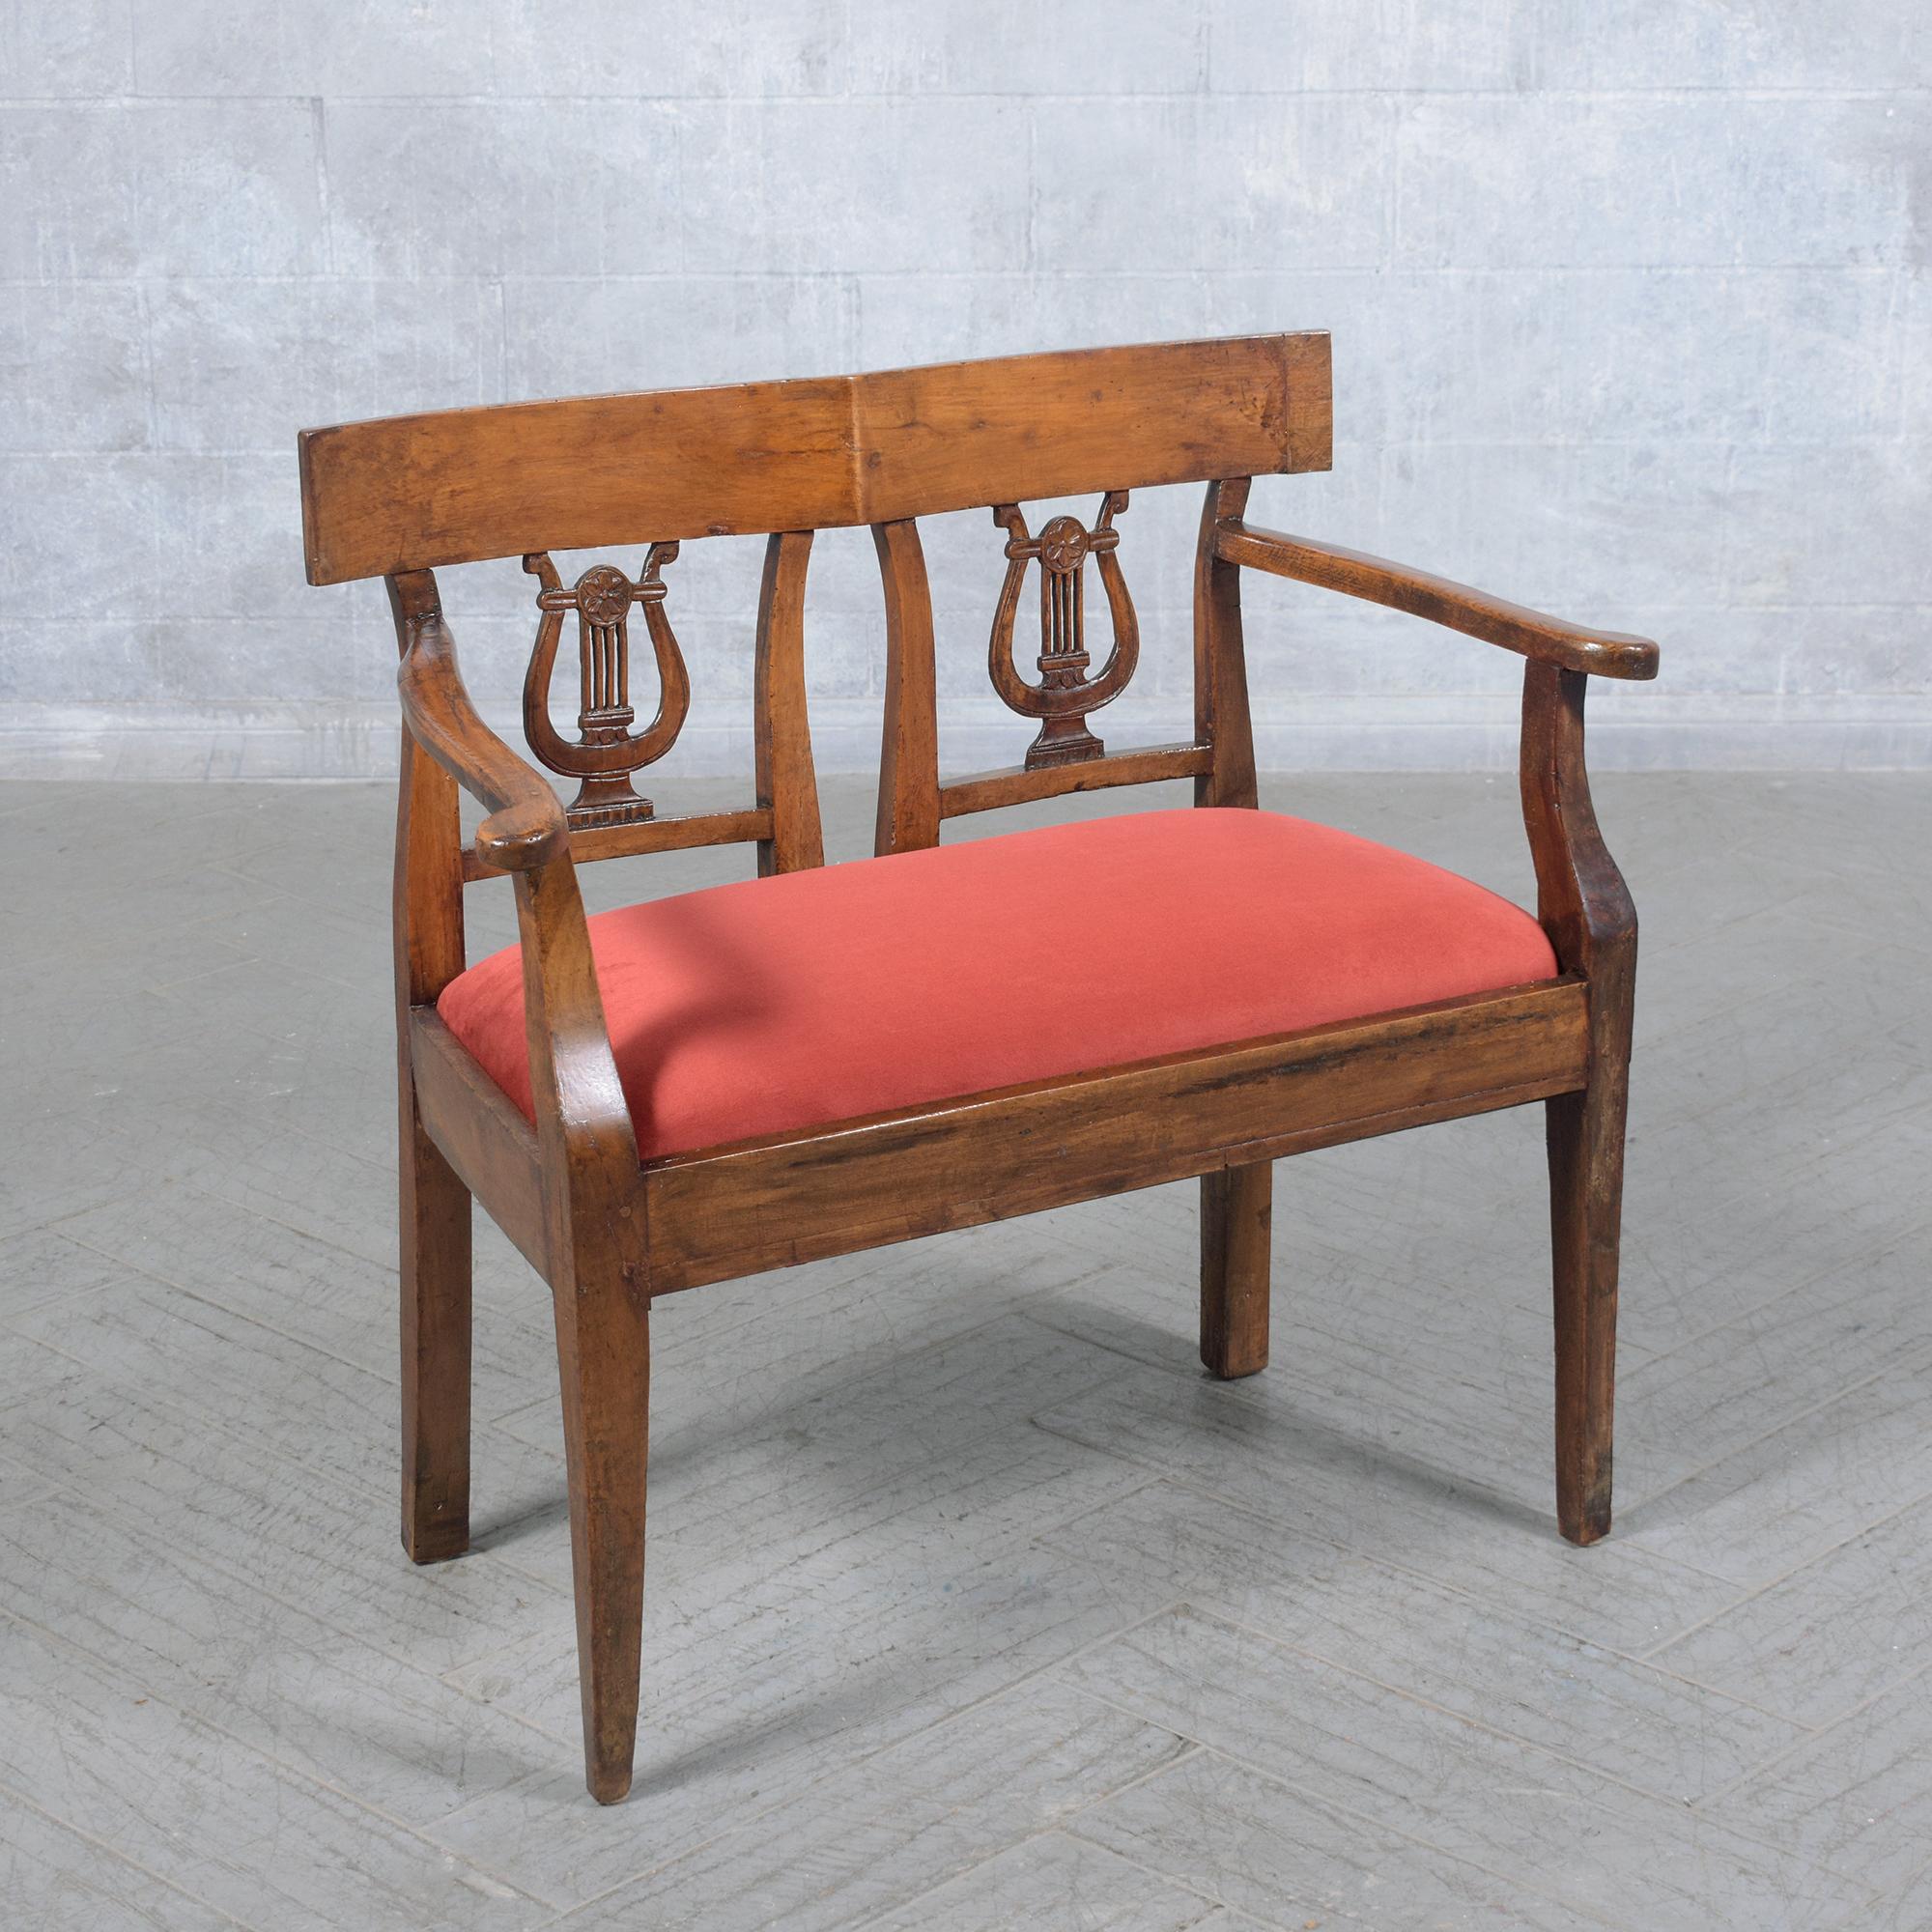 Fabric Late 18th-Century English Walnut Bench: Historical Craftsmanship Restored For Sale